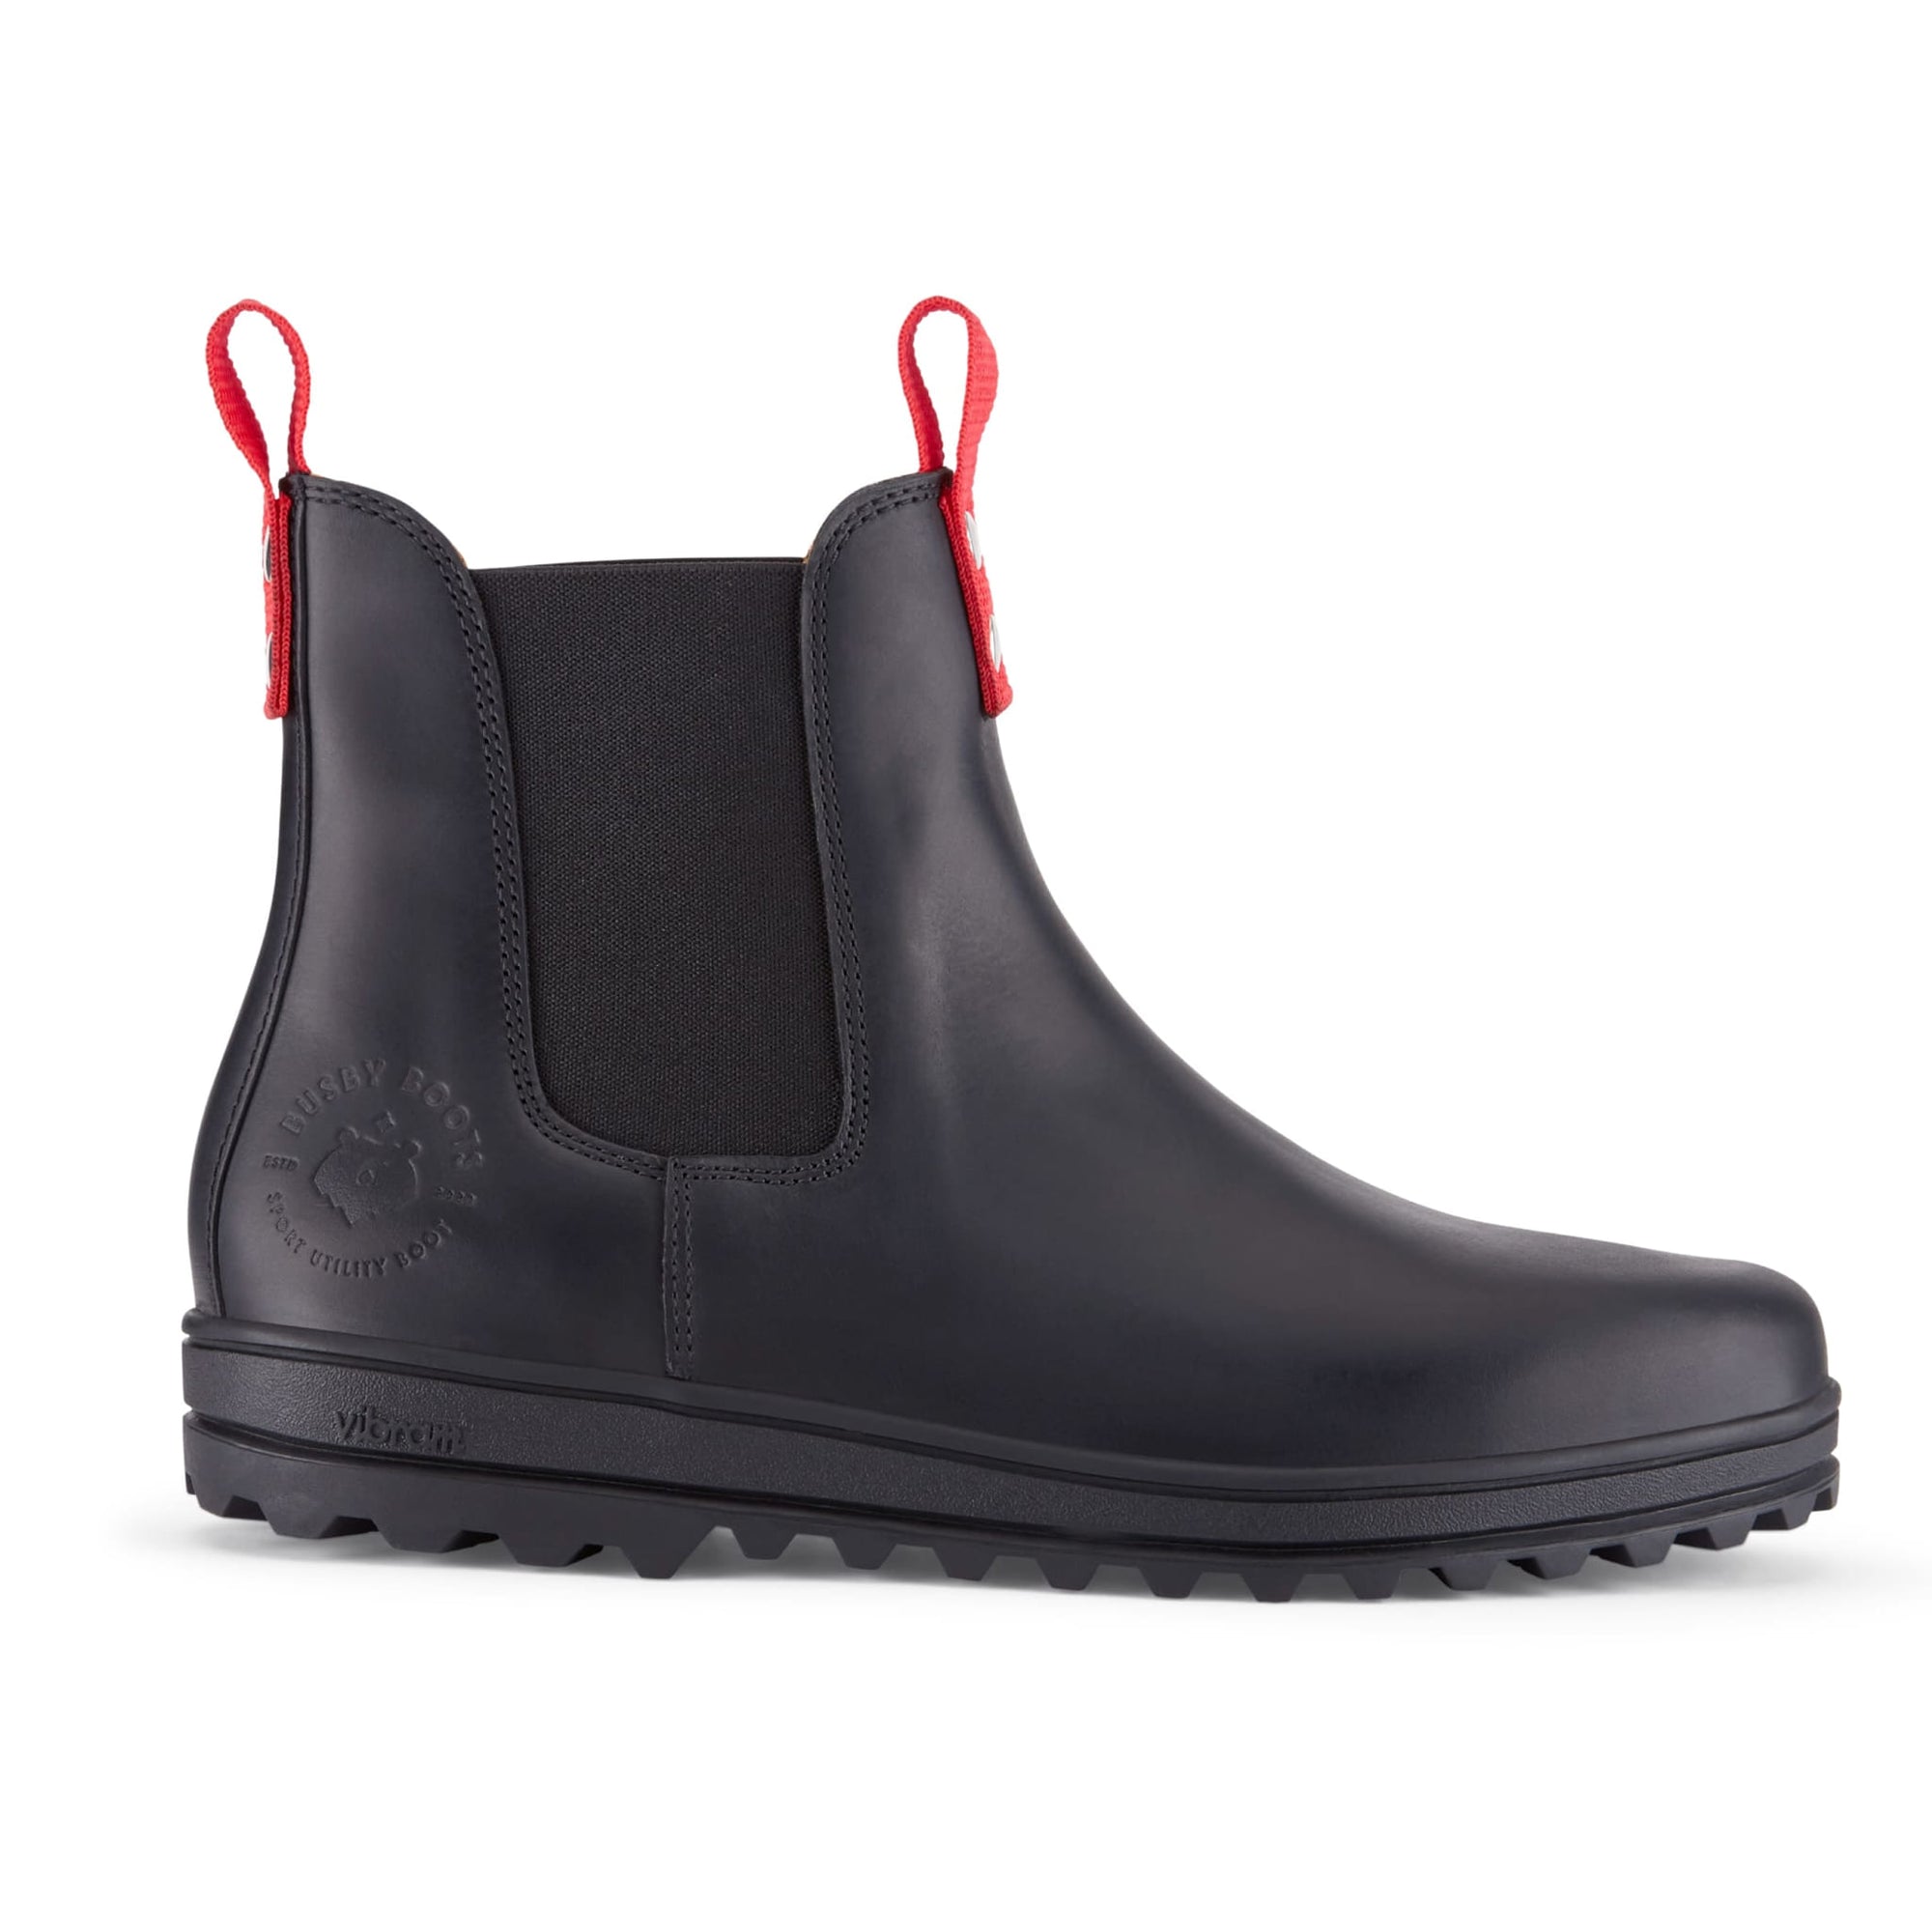 Busby Men's Winter Chelsea Boot, Black Leather